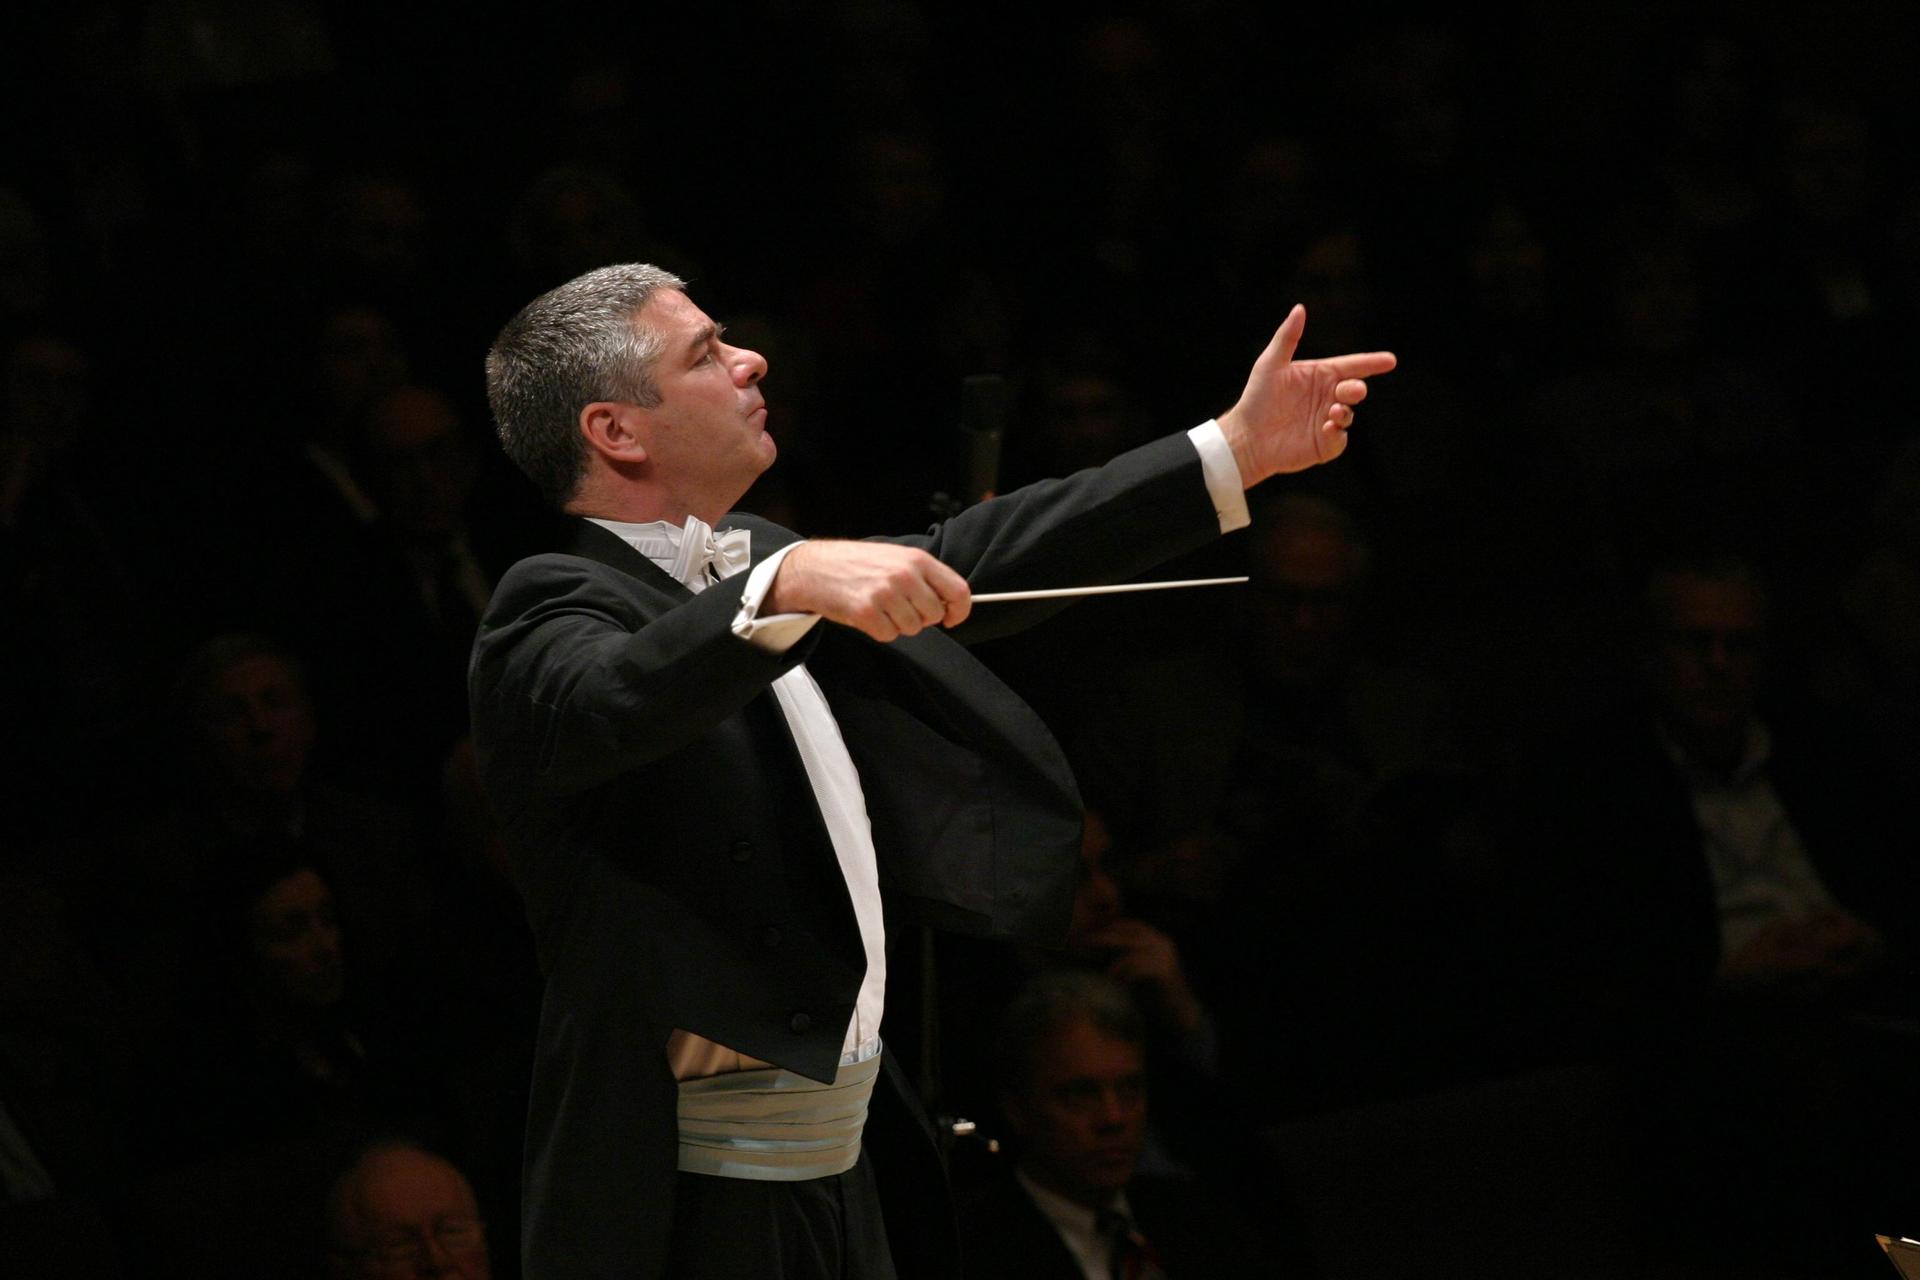 Welsh conductor Grant Llewellyn conducts an orchestra in 2007.